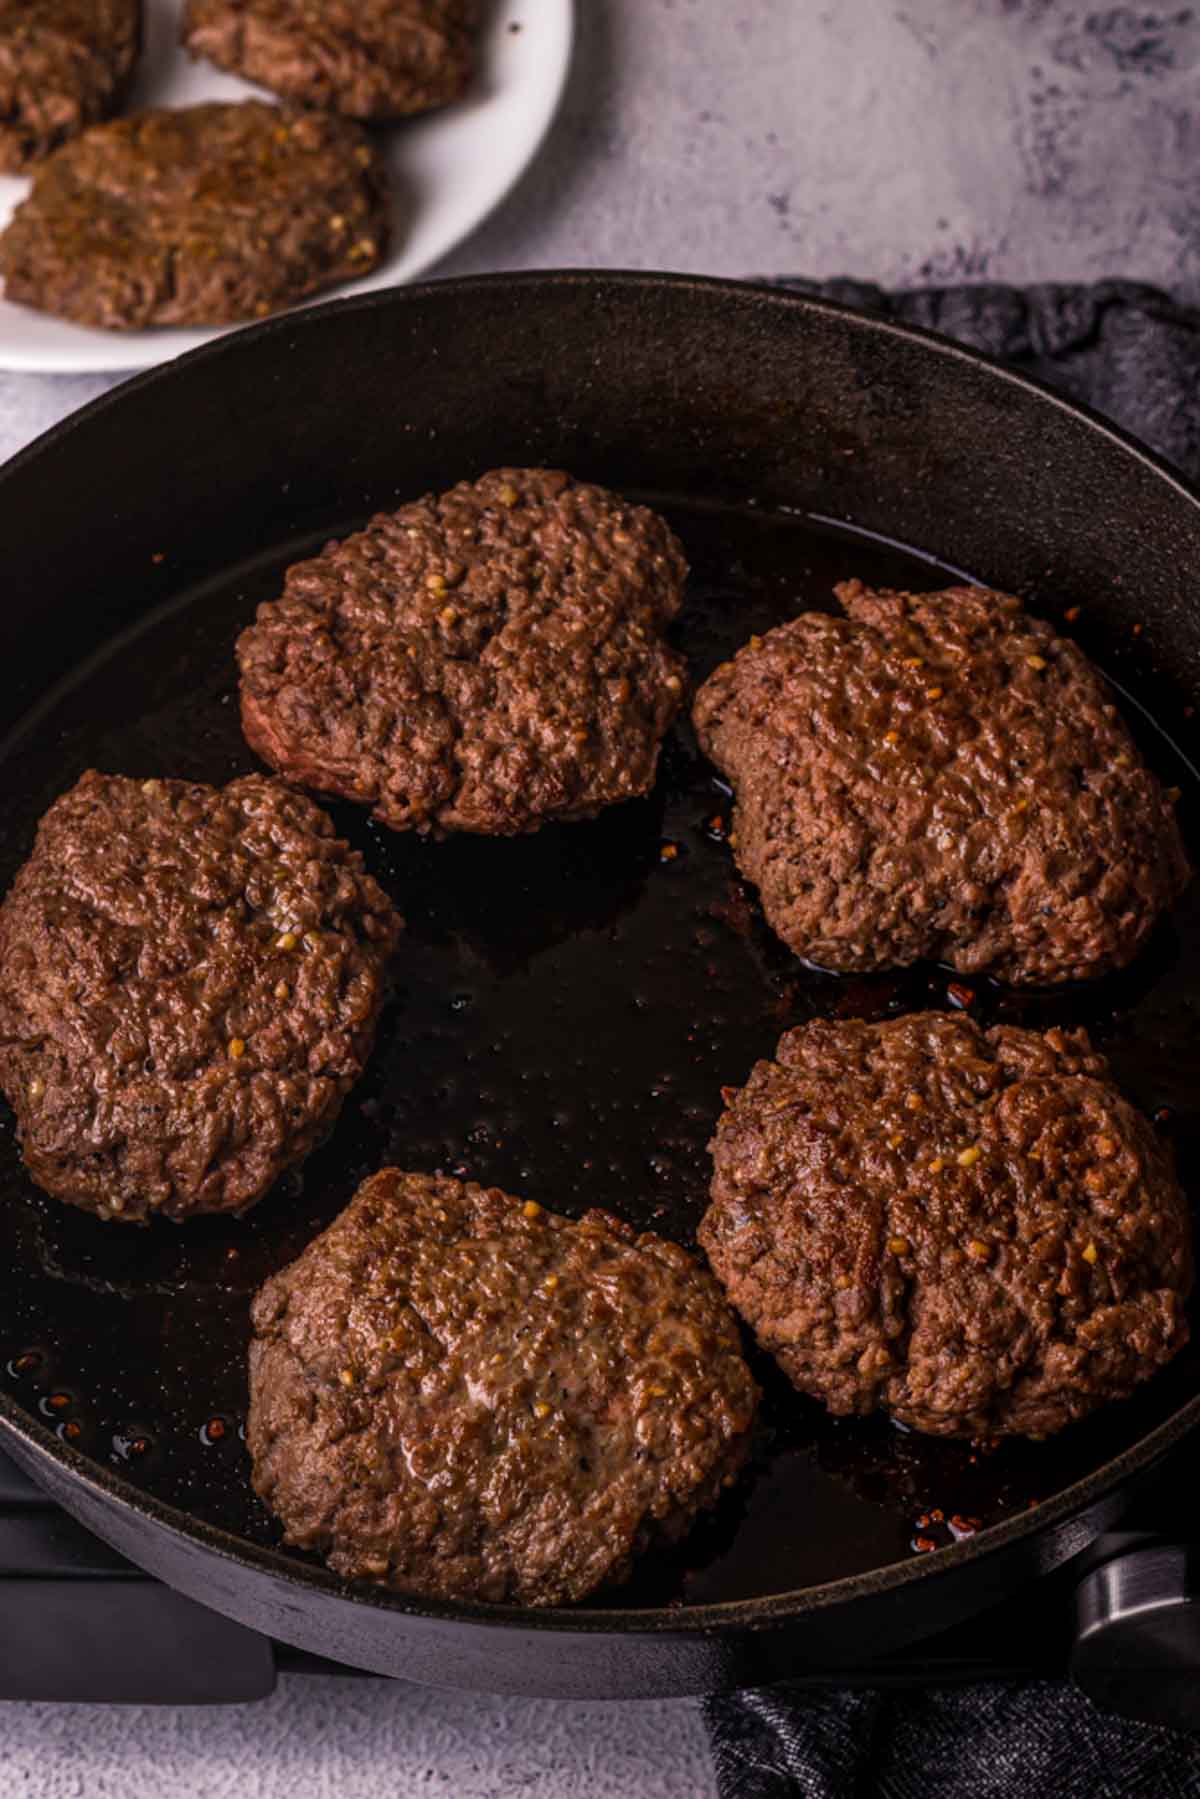 cooked hamburgers being seared in a skillet